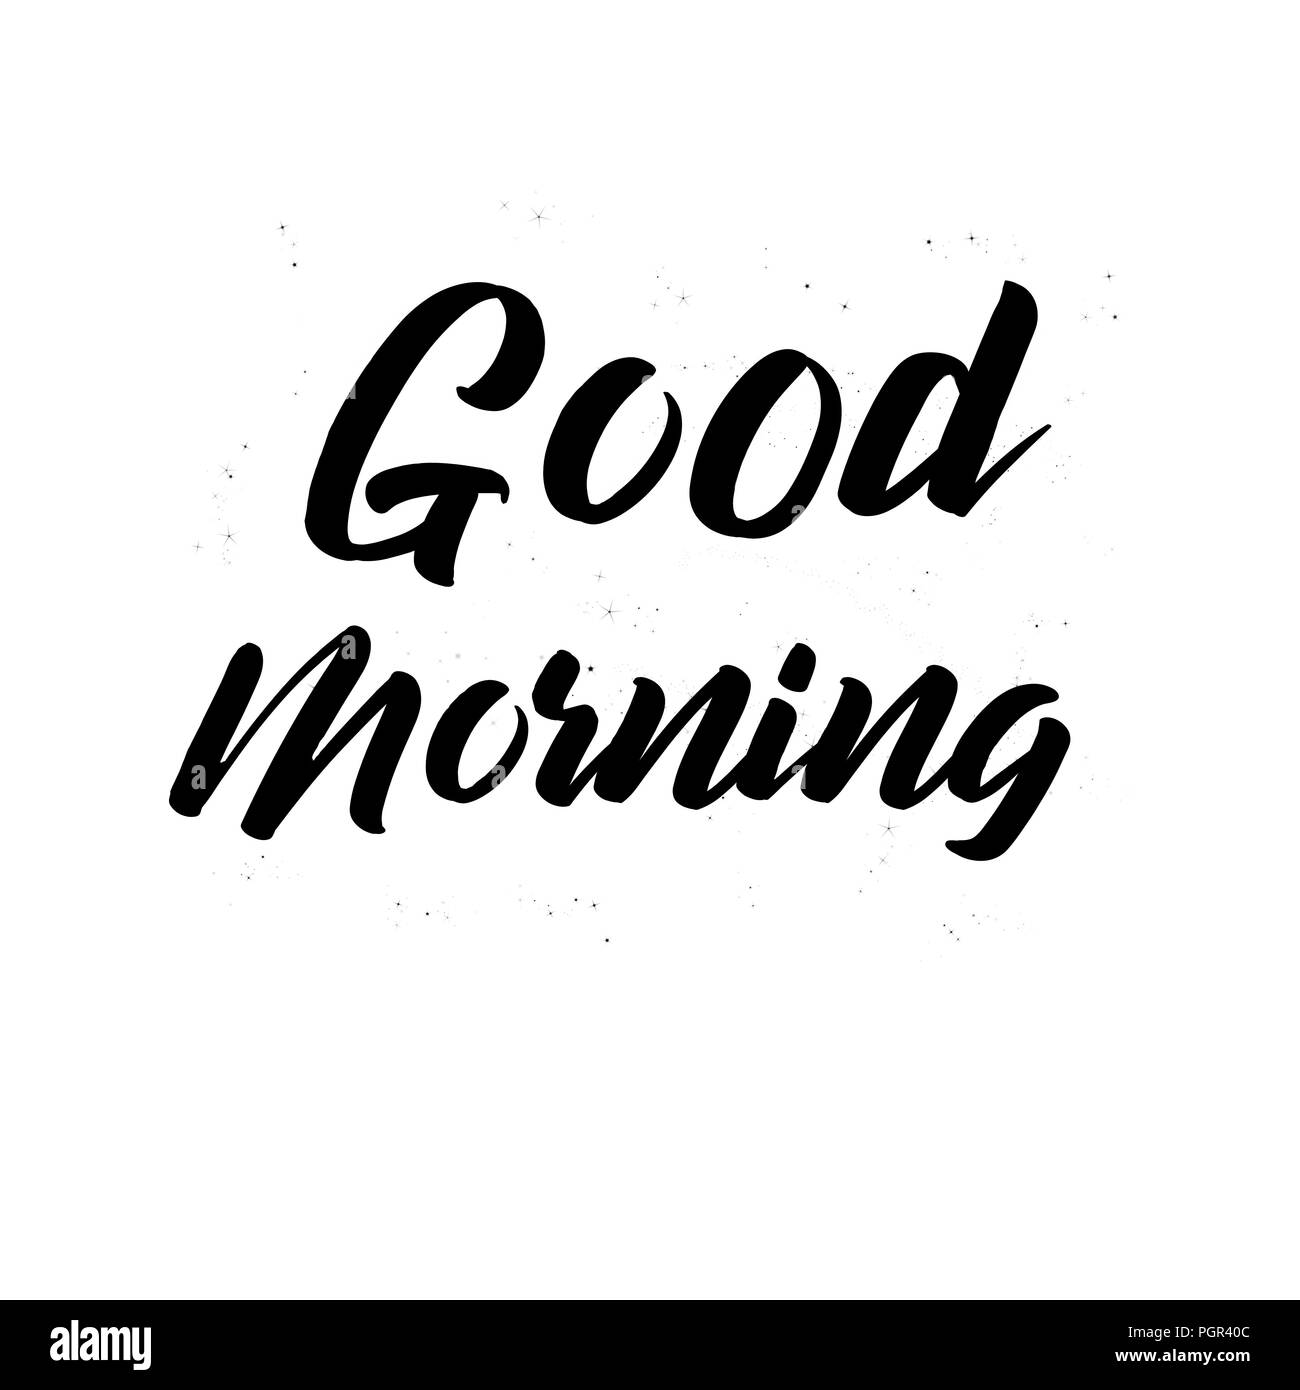 Good morning hand lettering with star dust Stock Photo - Alamy